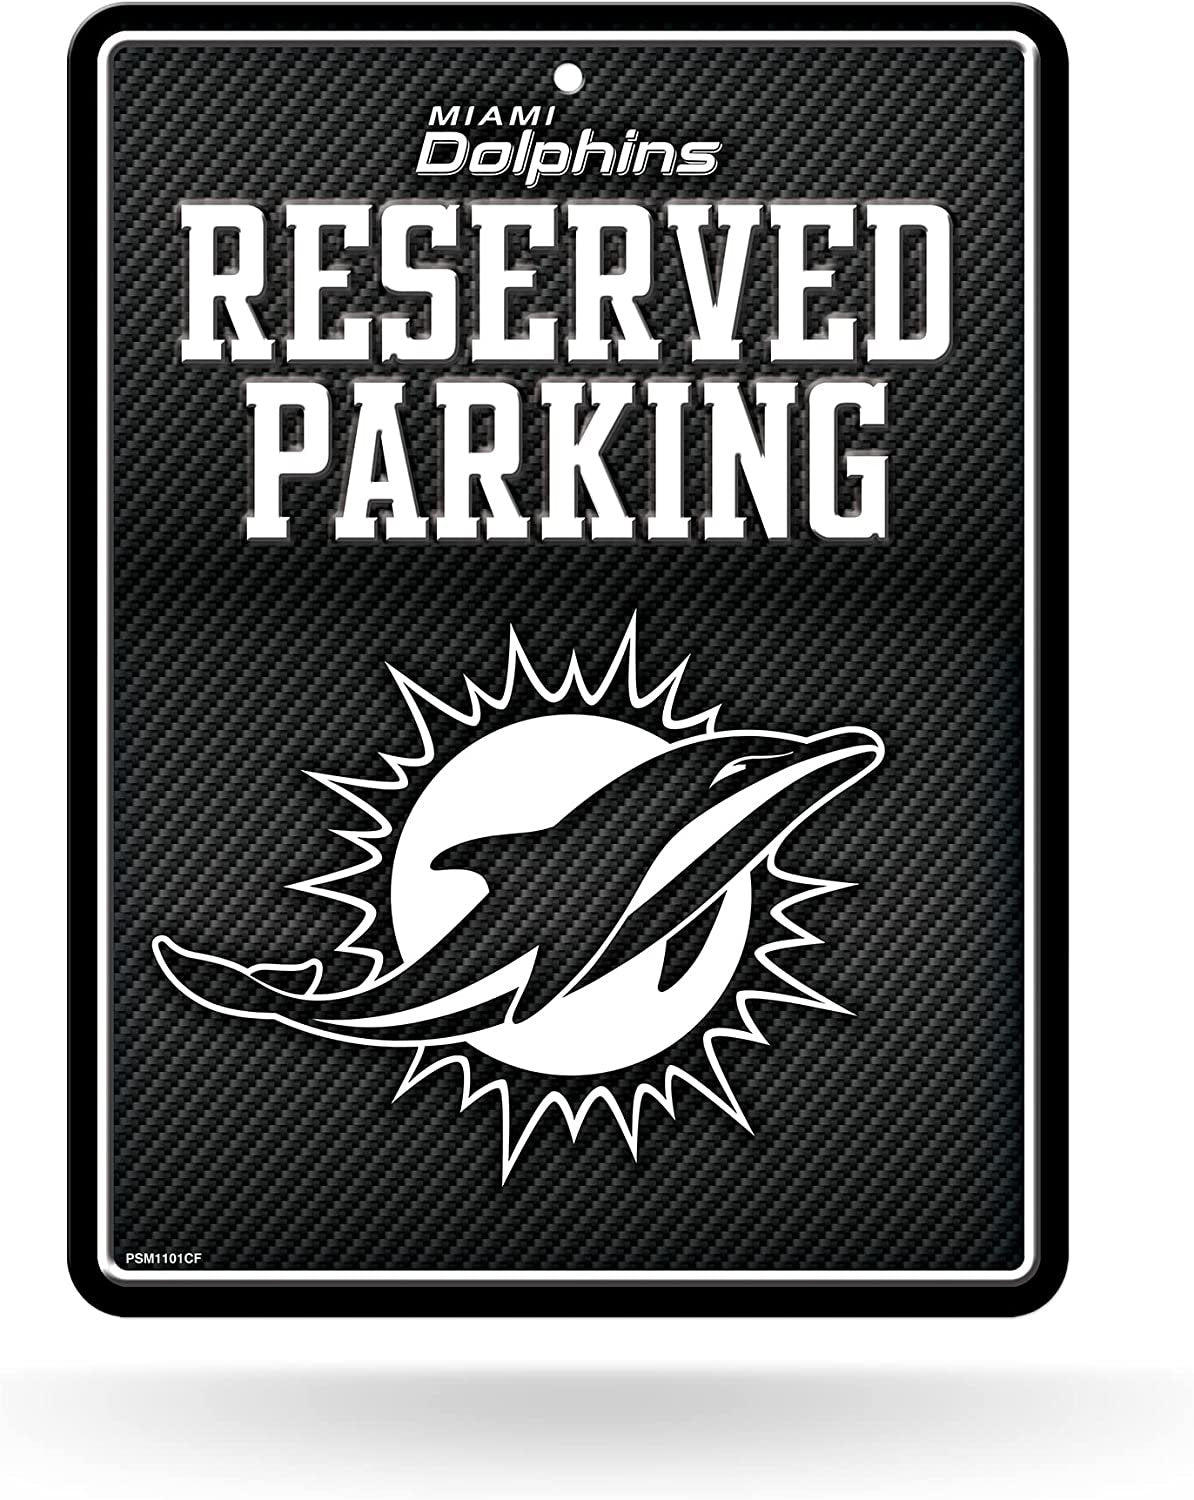 Miami Dolphins Metal Parking Novelty Wall Sign 8.5 x 11 Inch Carbon Fiber Design